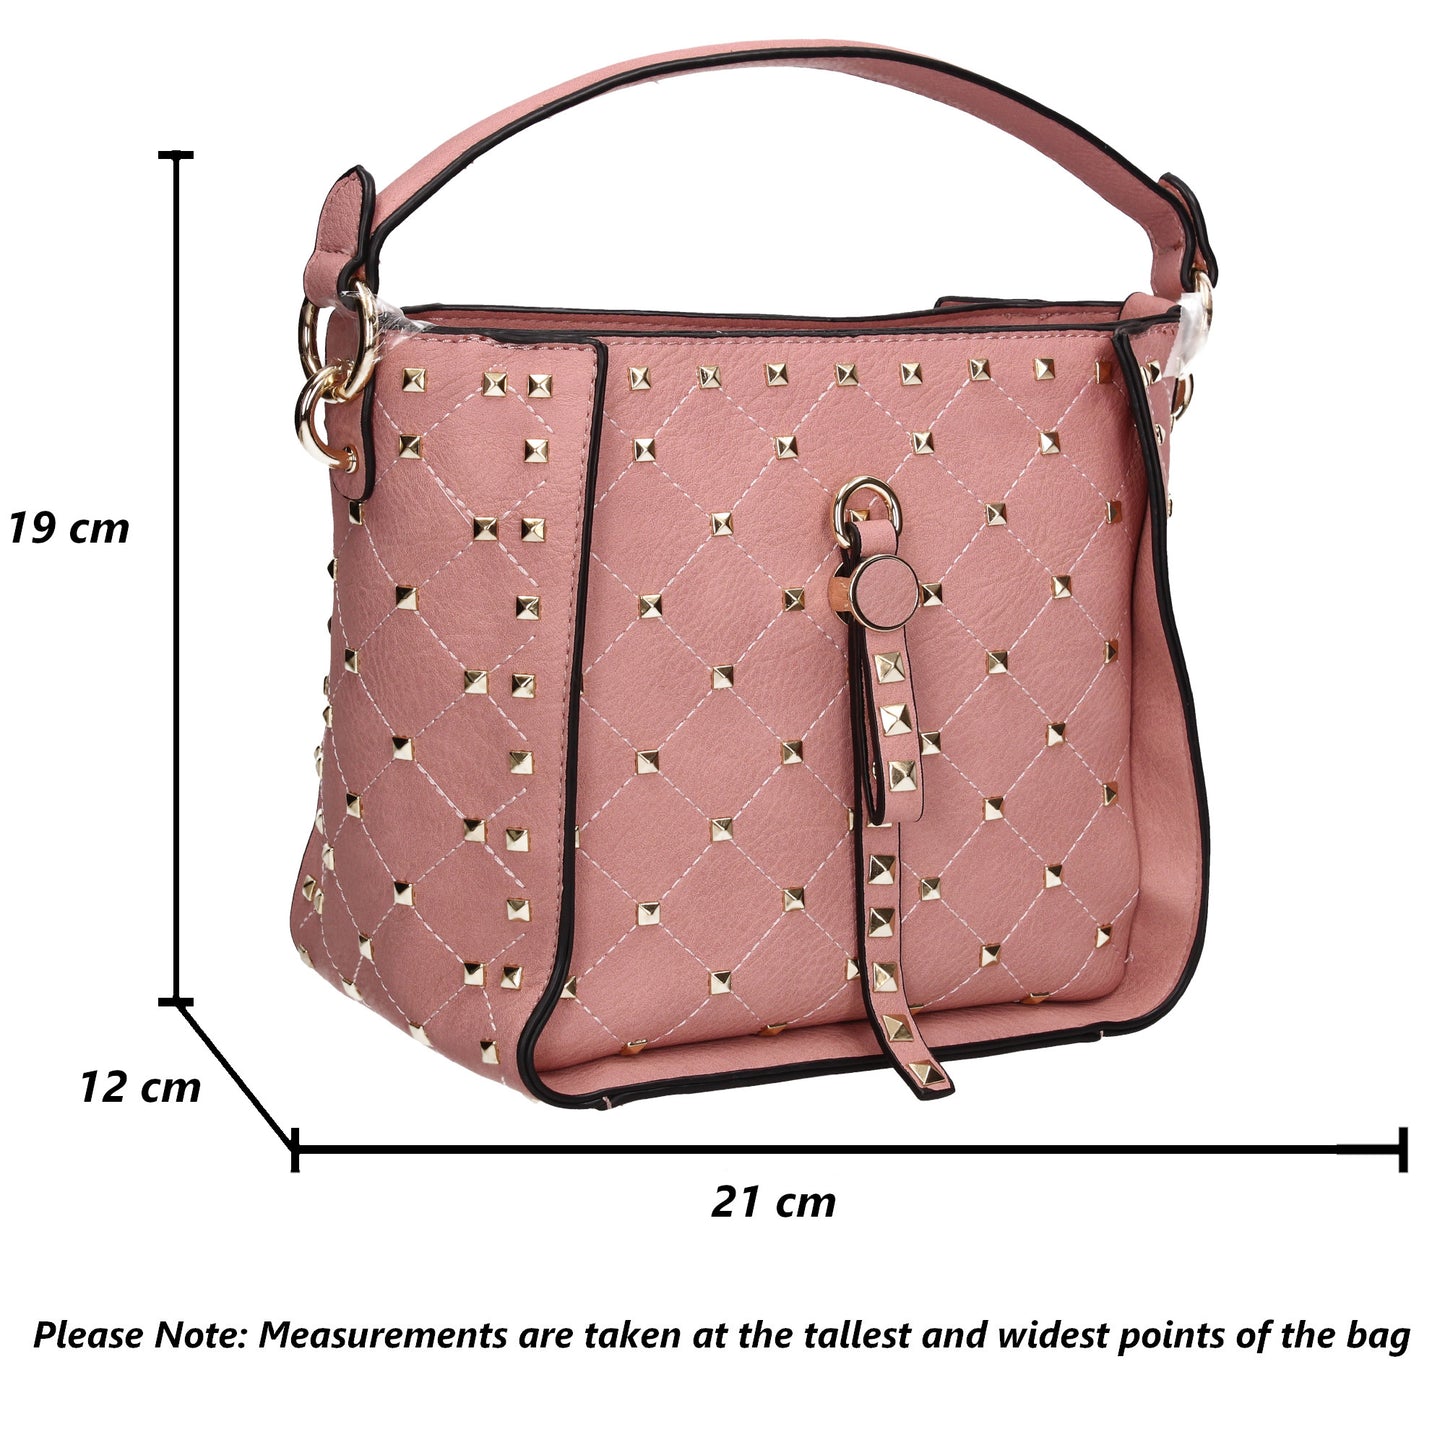 Buy your Faith Handbag Pink Today! Buy with confidence from Swankyswans